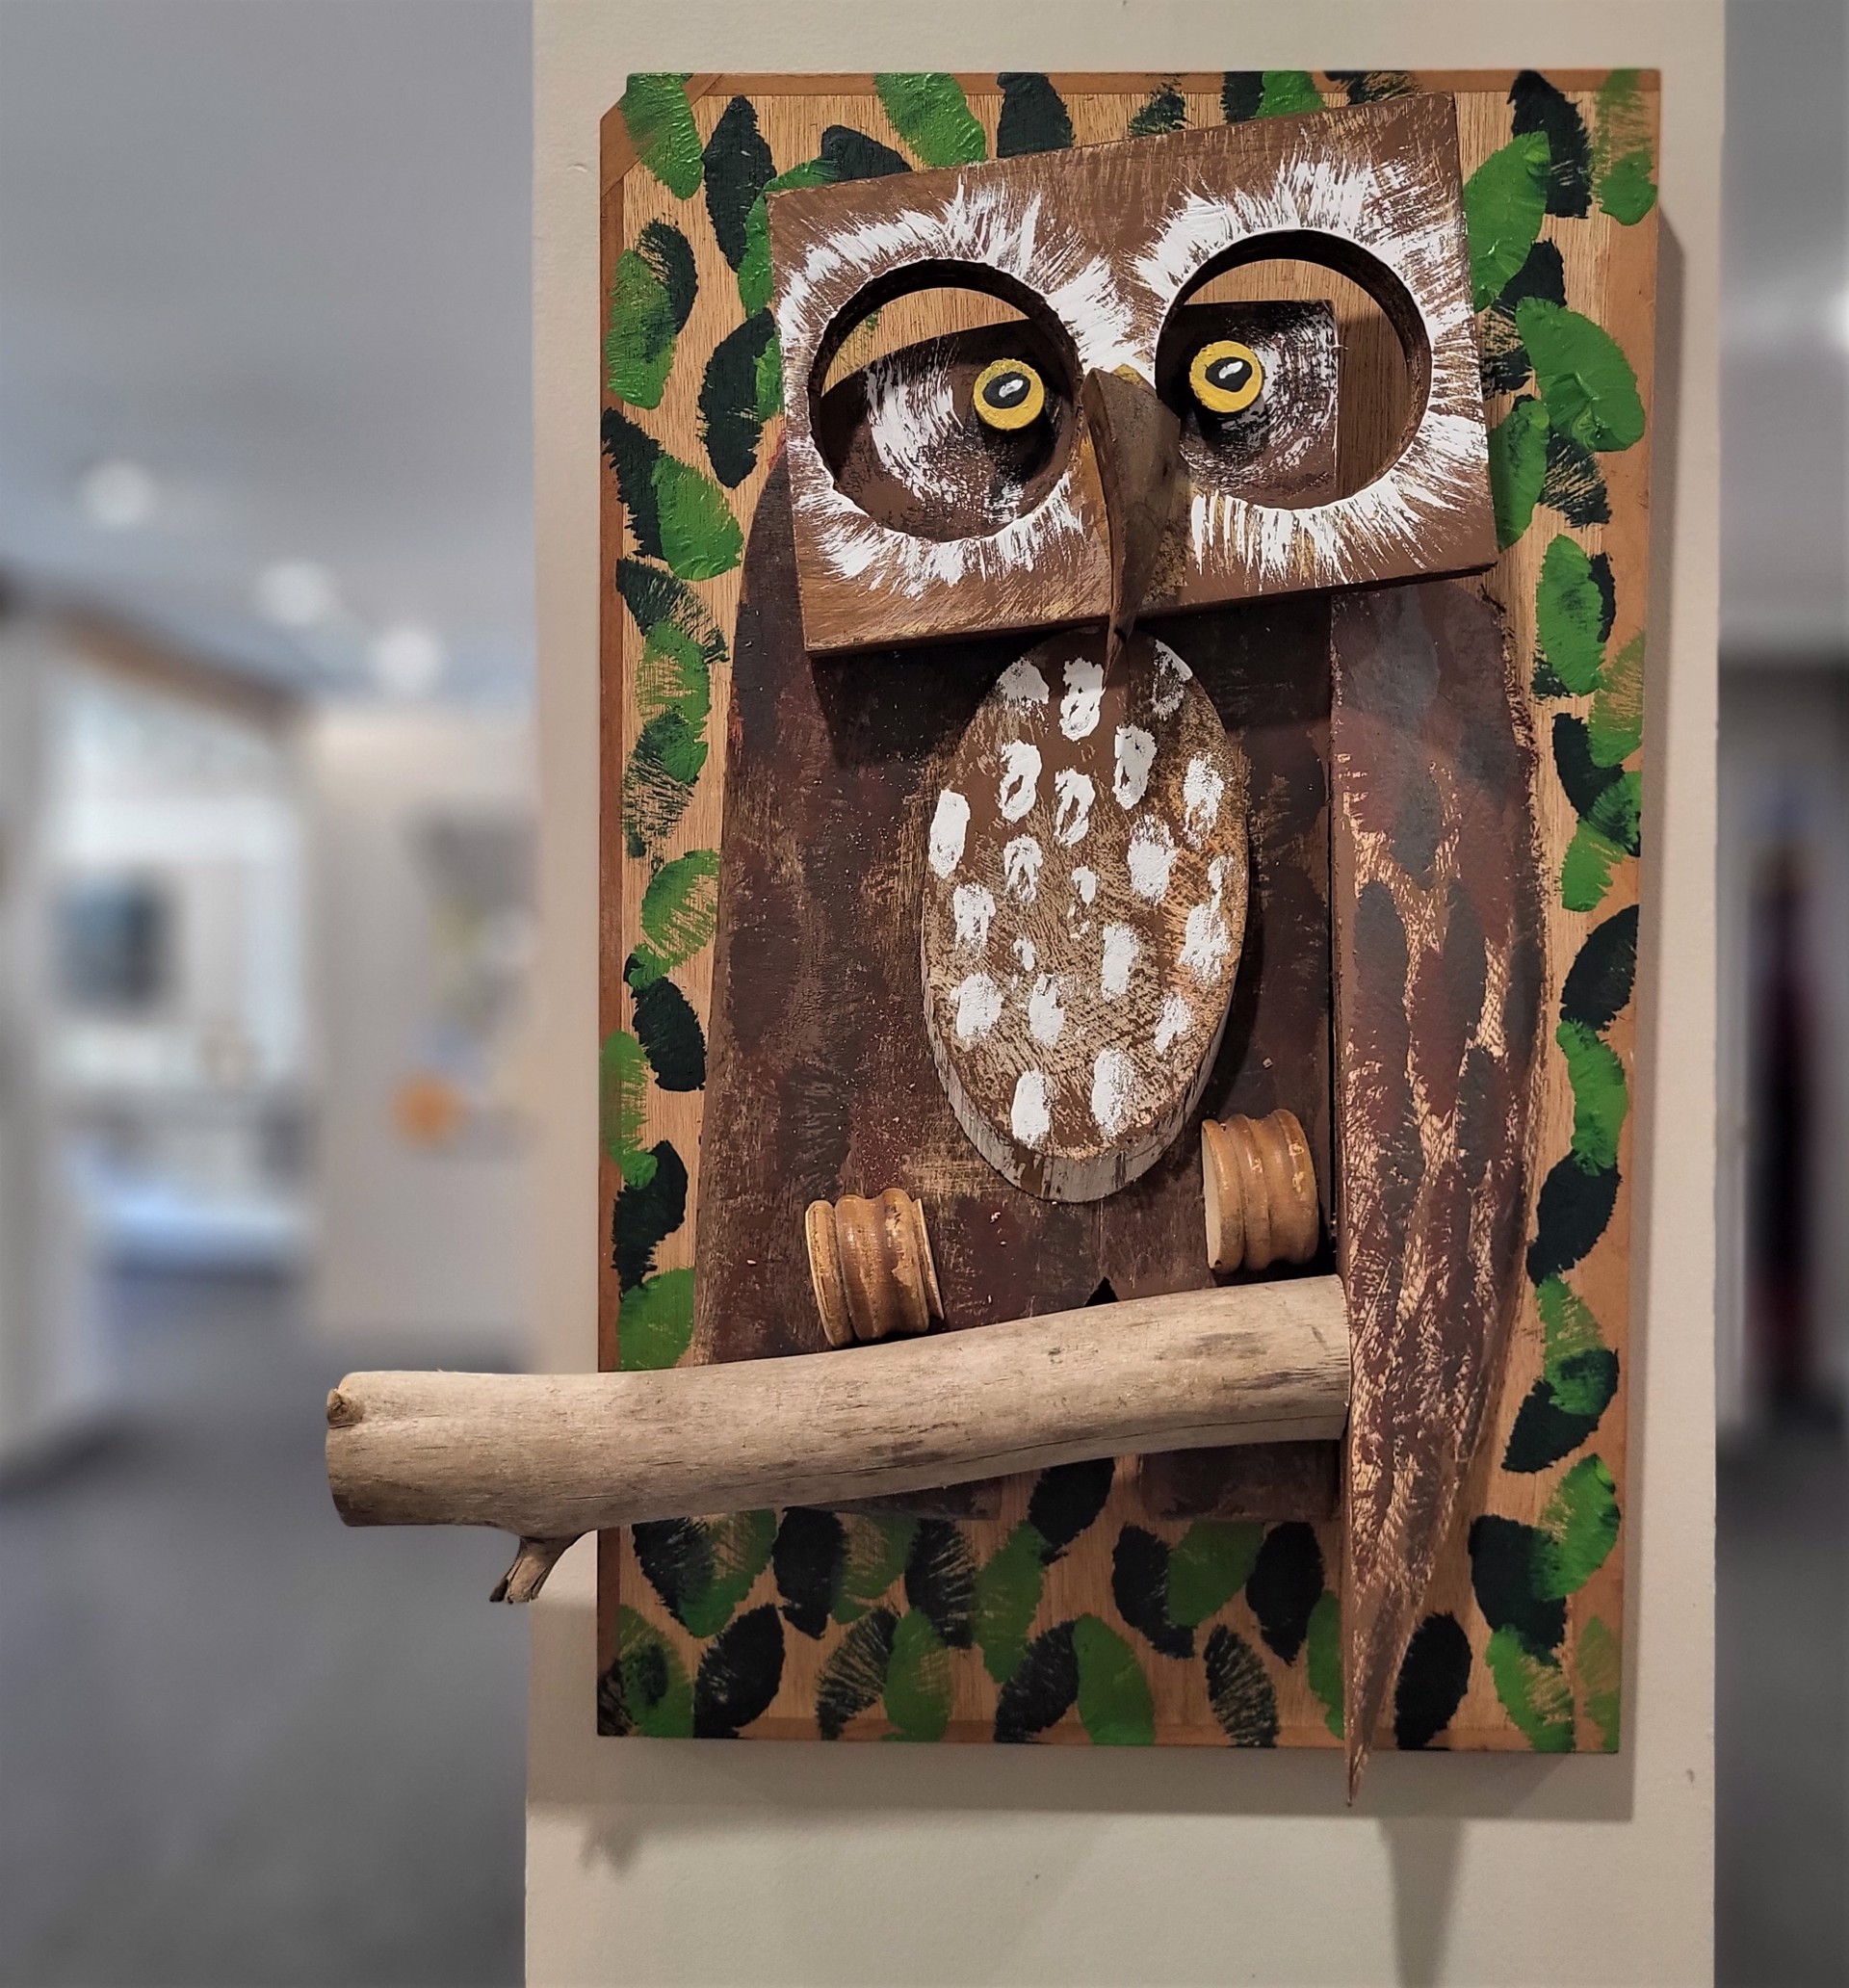 SAW WHET OWL by ANDRE BENOIT